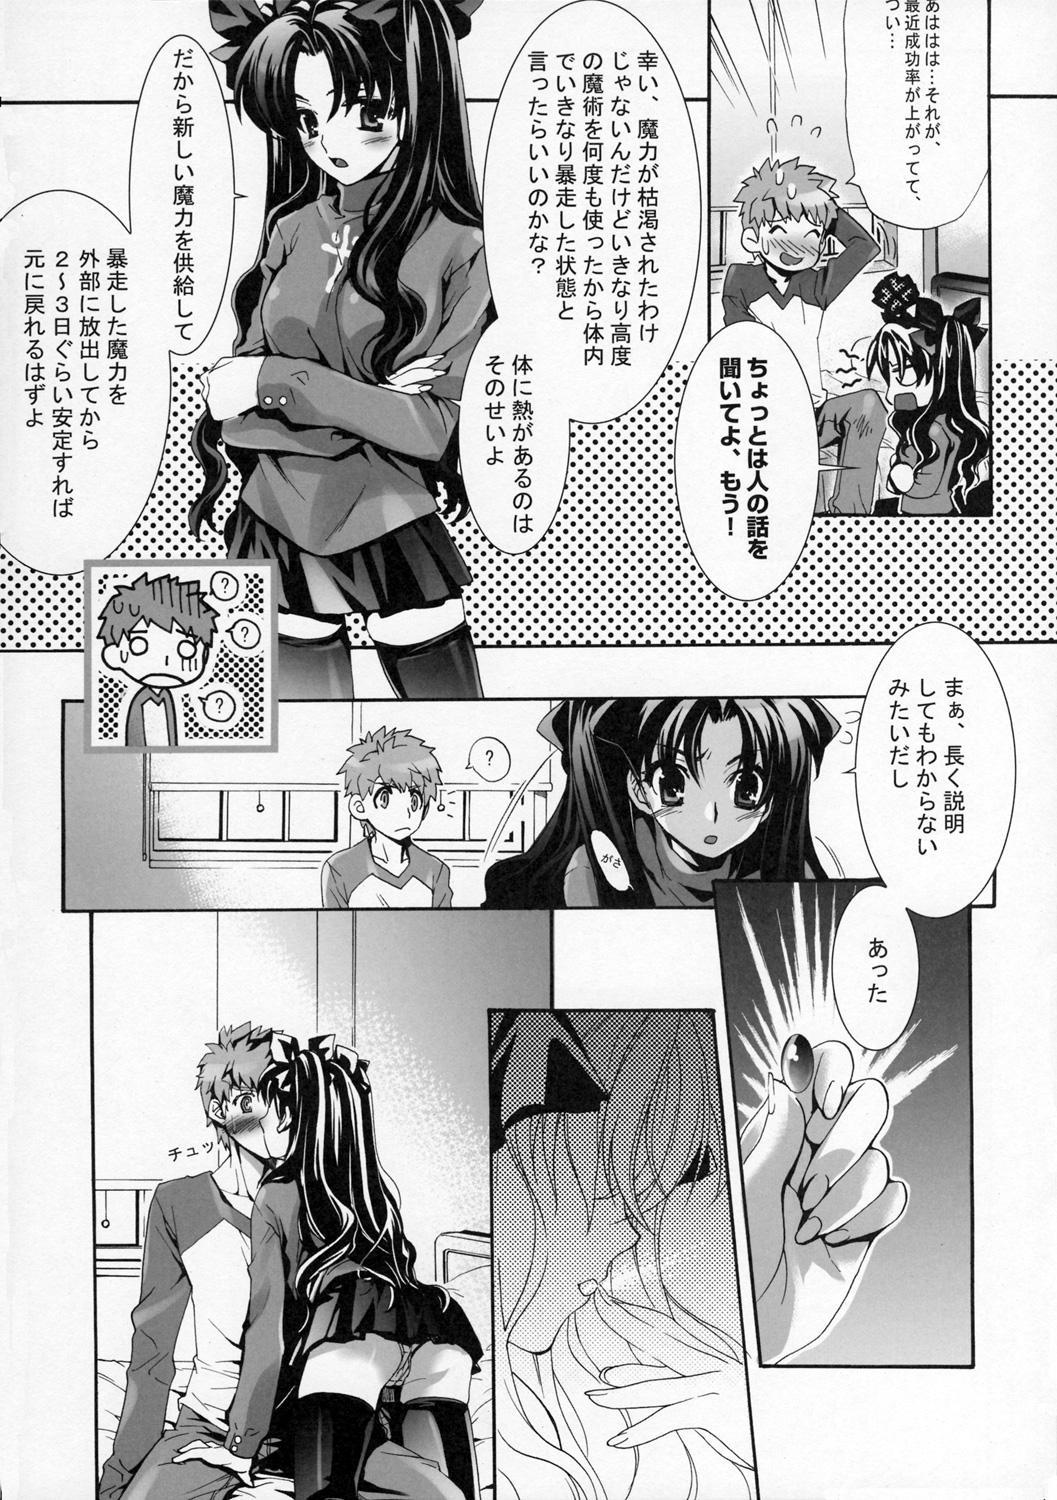 Big Pussy Mittsubotan de kyun! - Fate stay night Toheart2 Roludo - Page 7